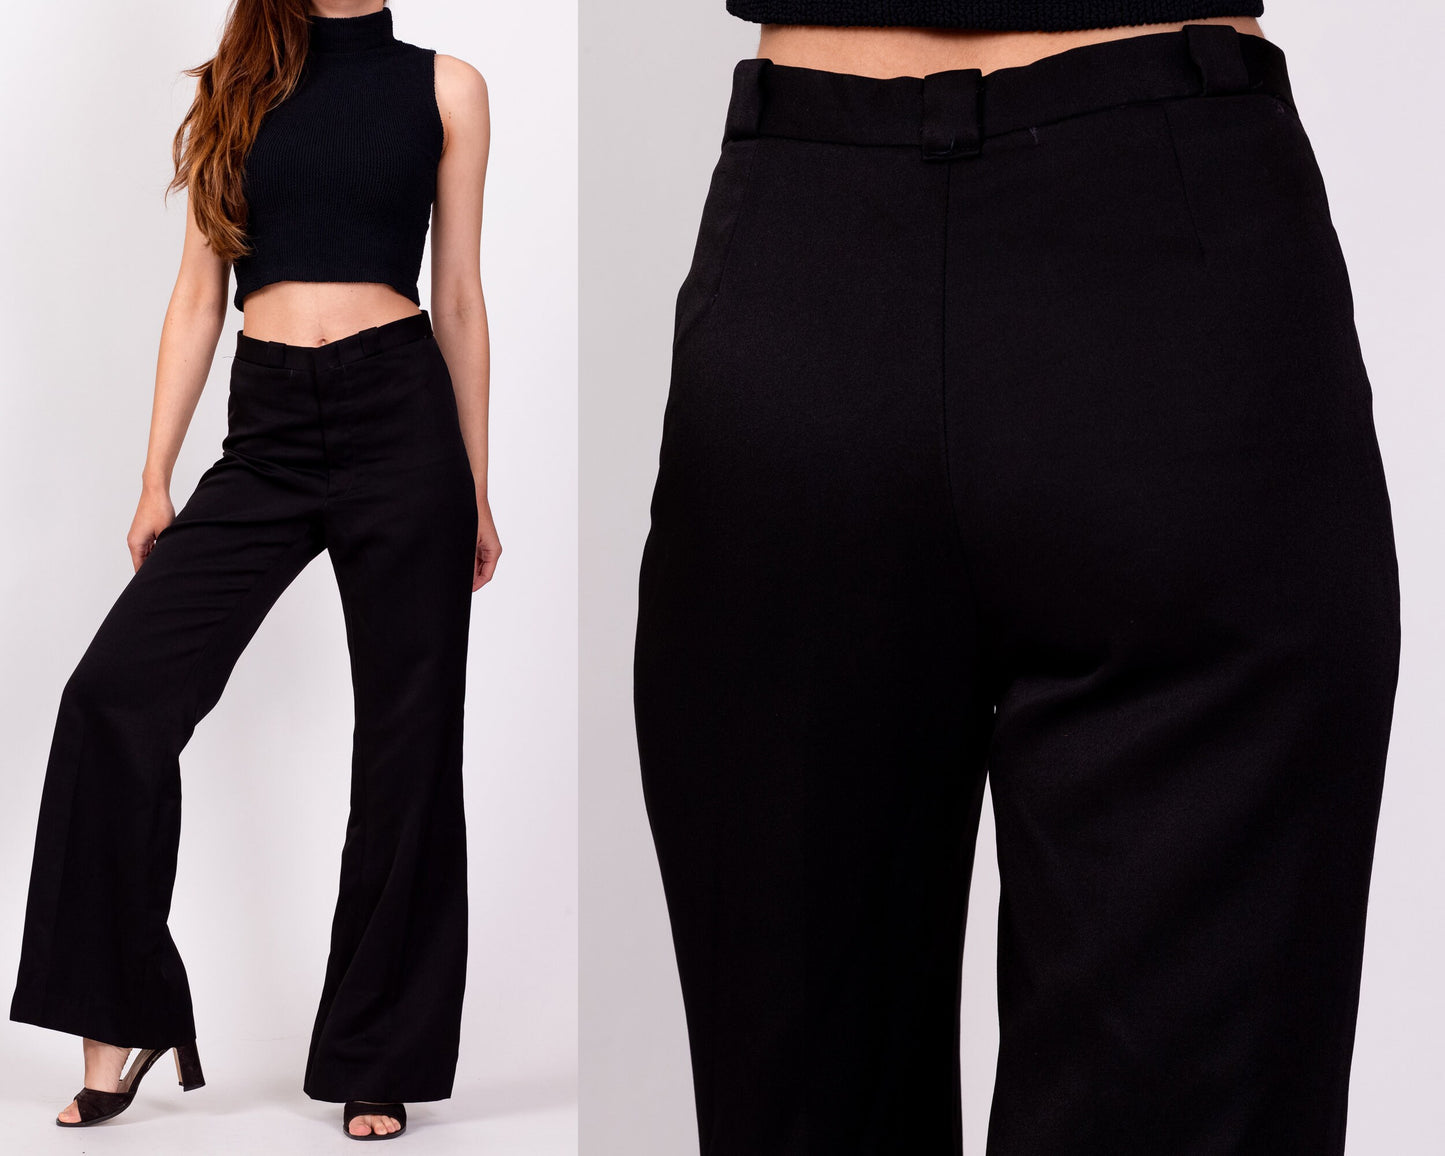 70s Black High Waisted Flared Pants - Petite Small, 26" 